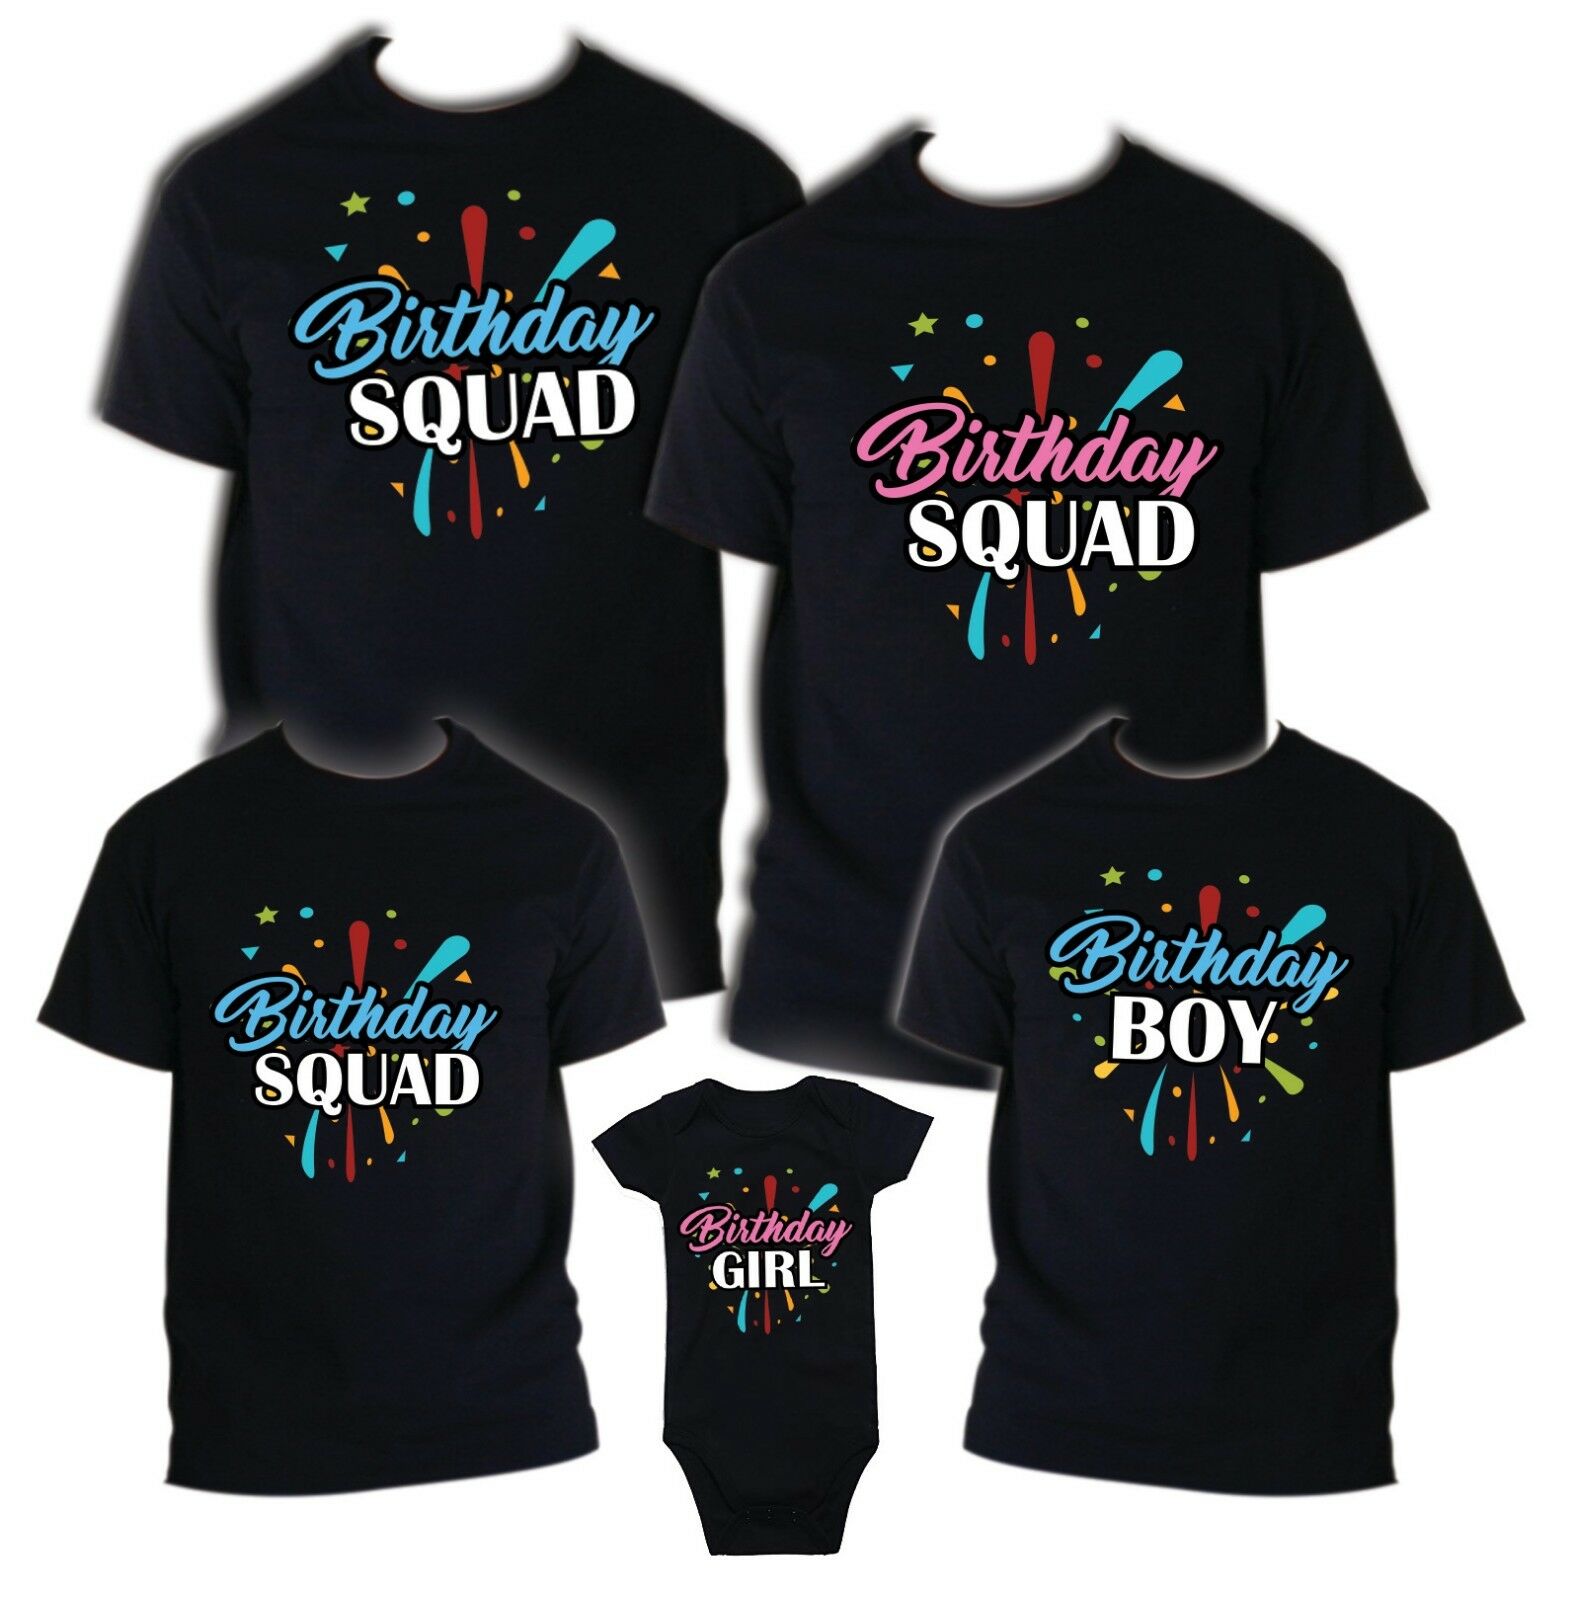 Birthday Squad Matching T-shirts Party Family Kid Reunion Goals Girl Boyfriends